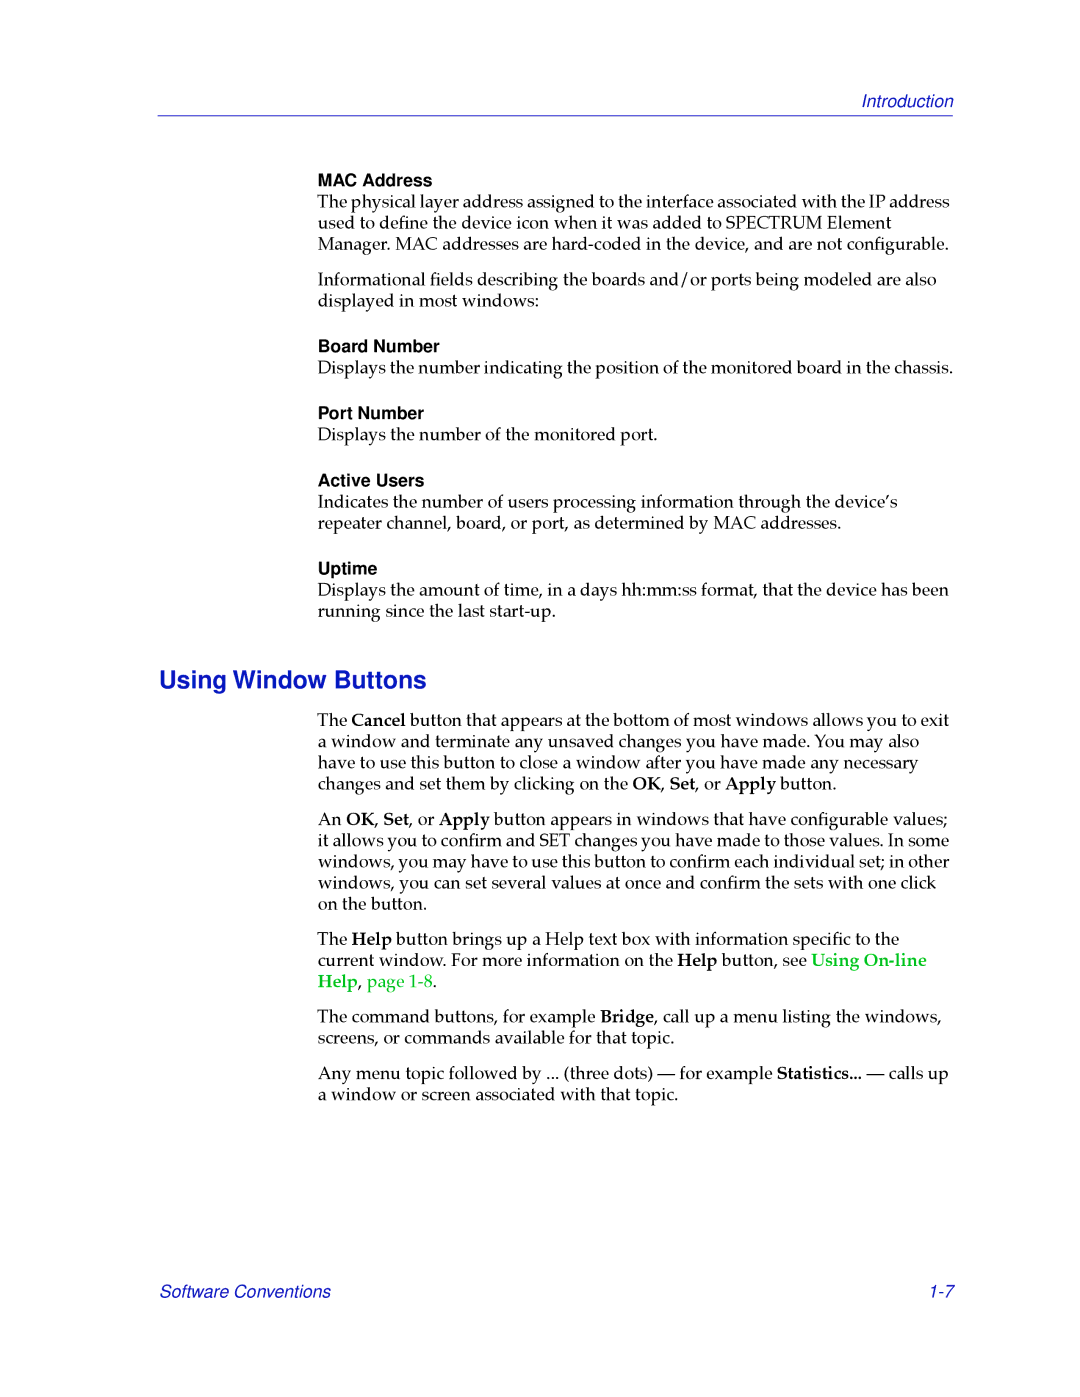 Cabletron Systems 2.2 manual Using Window Buttons 